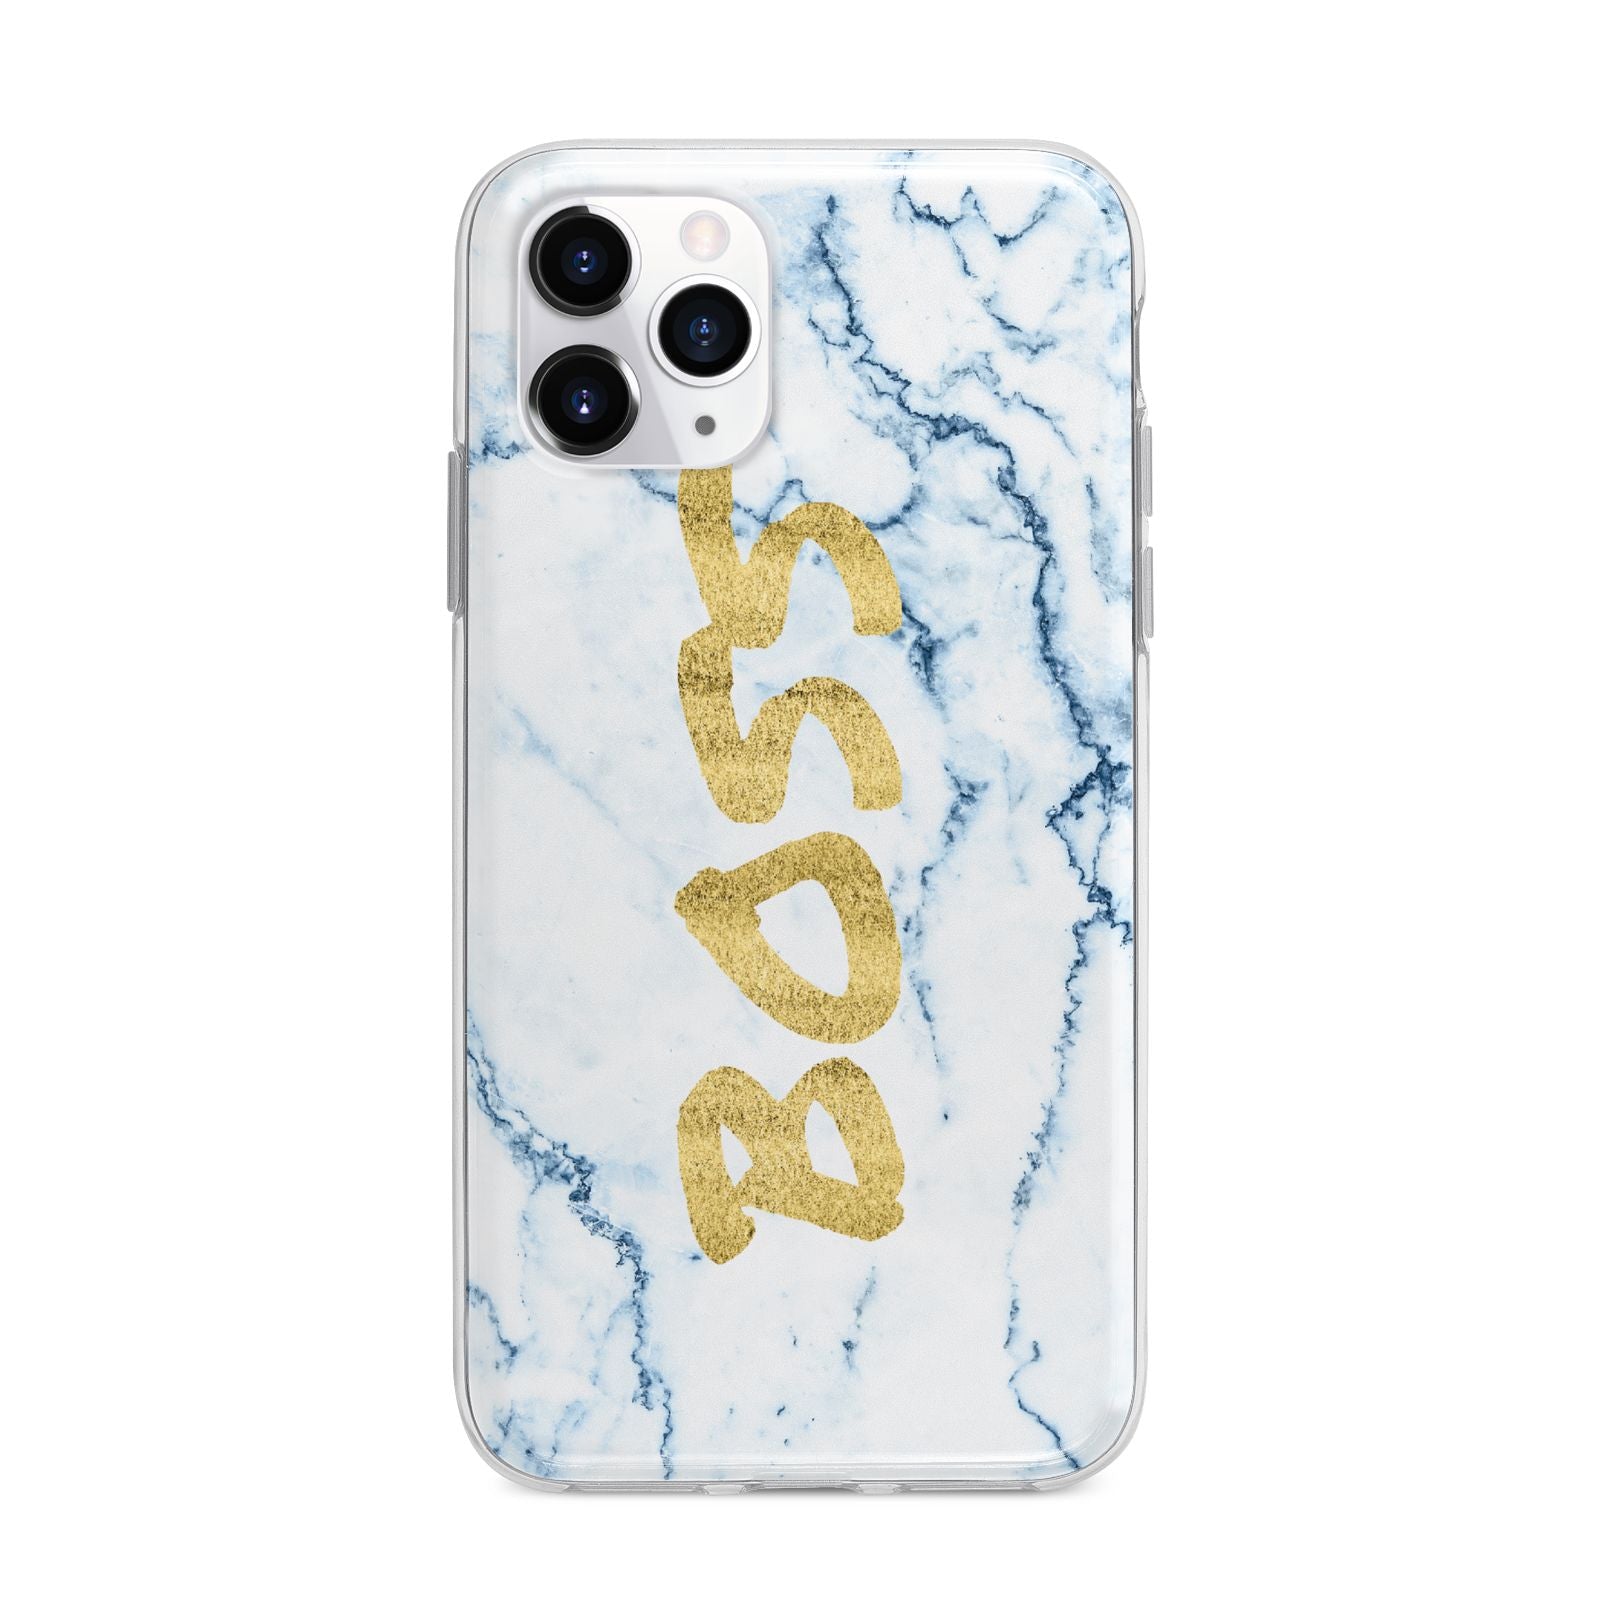 Boss Gold Blue Marble Effect Apple iPhone 11 Pro in Silver with Bumper Case